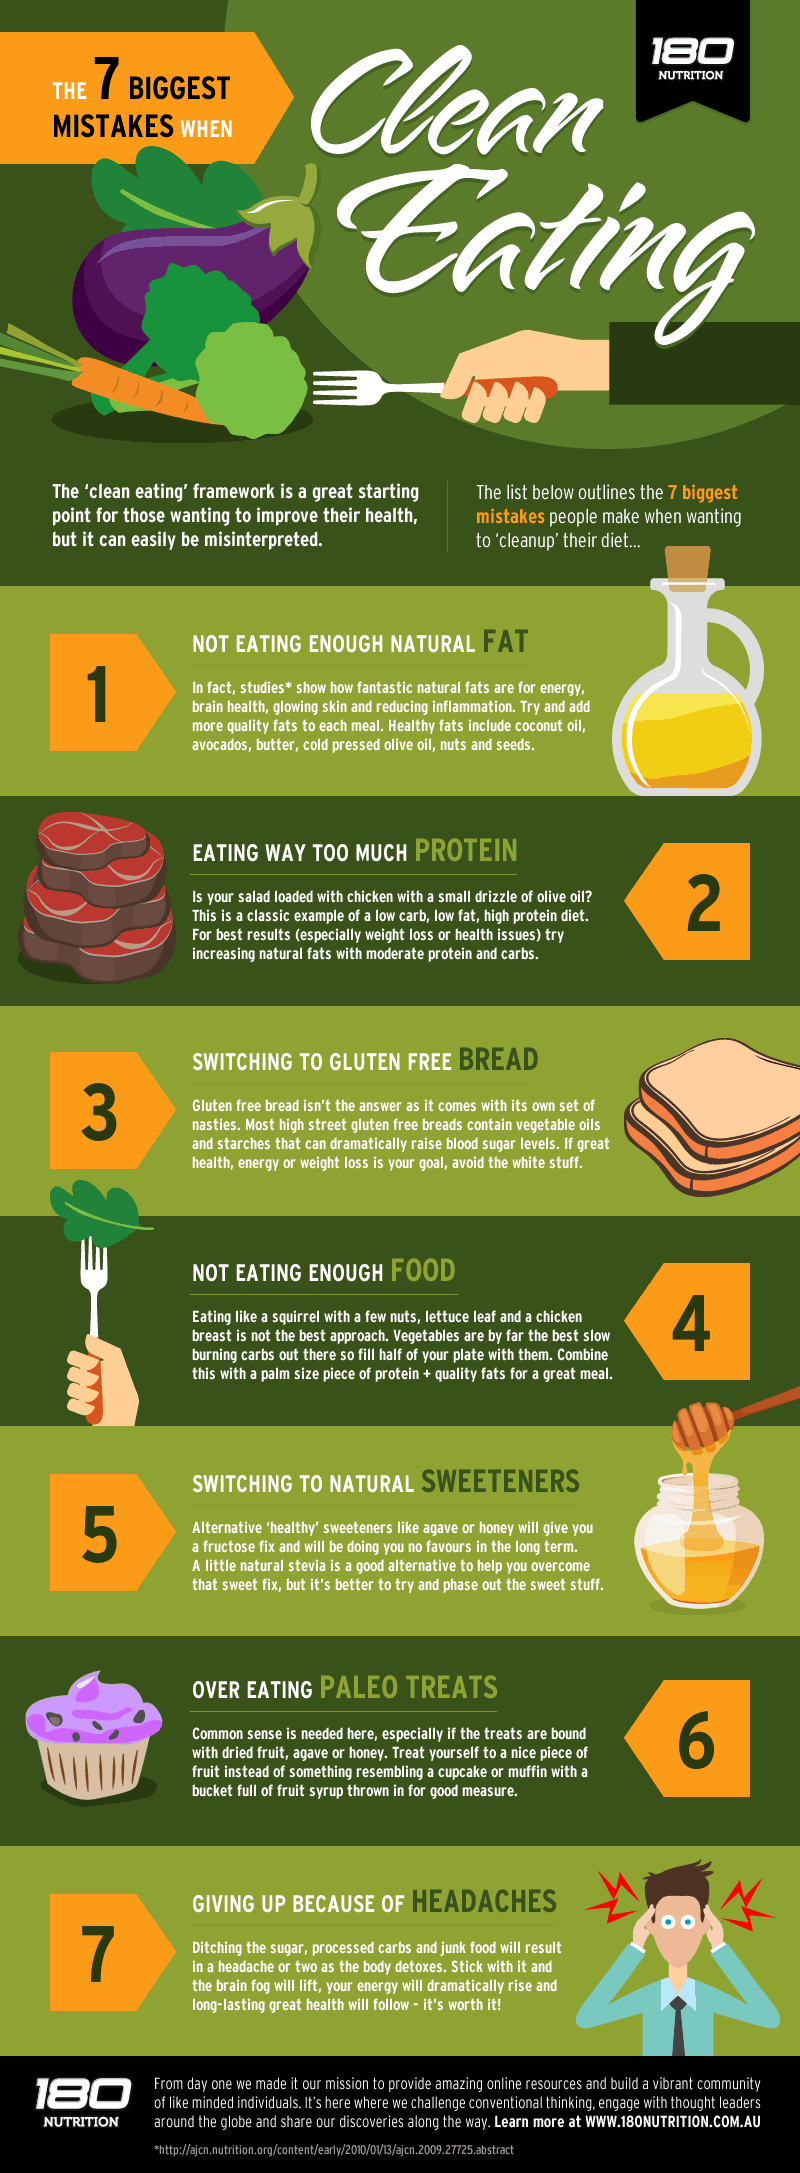 Clean-Eating-Mistakes-infographic-plaza